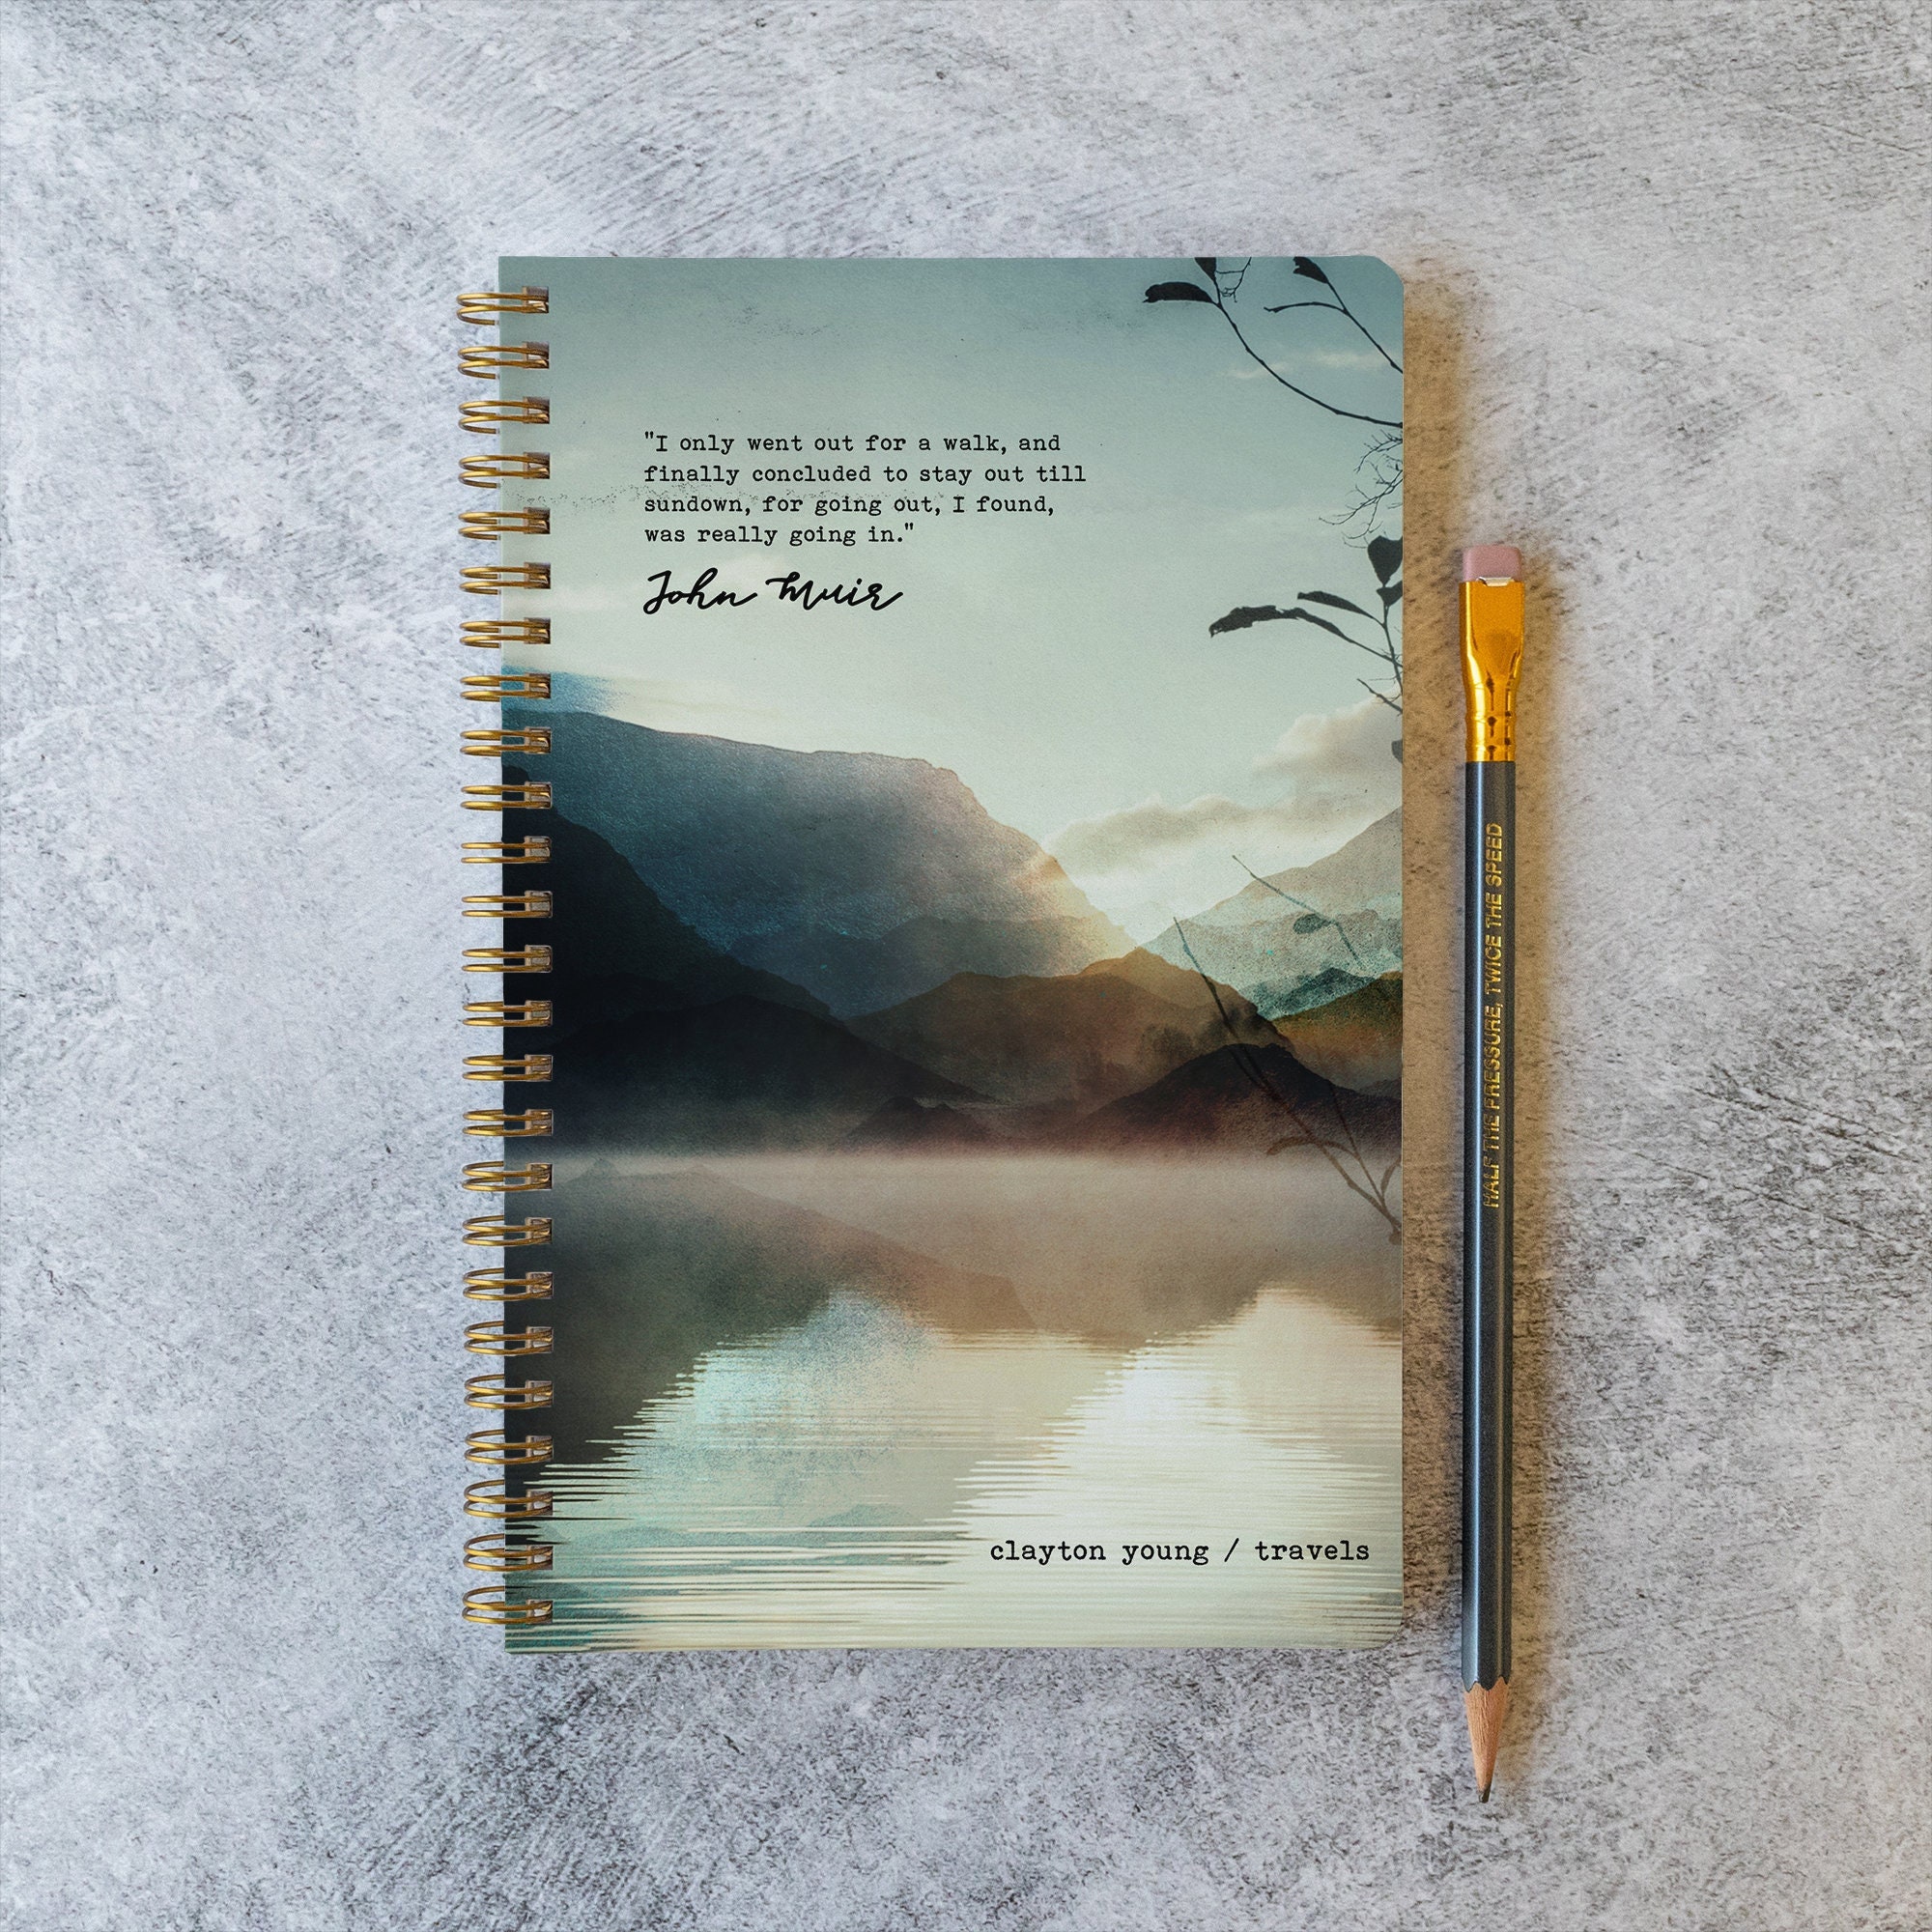 Inspirational Journal Walk With the Wise and Become Wise, Proverbs 13:20 Journaling  Book, Bible Verse Journal 